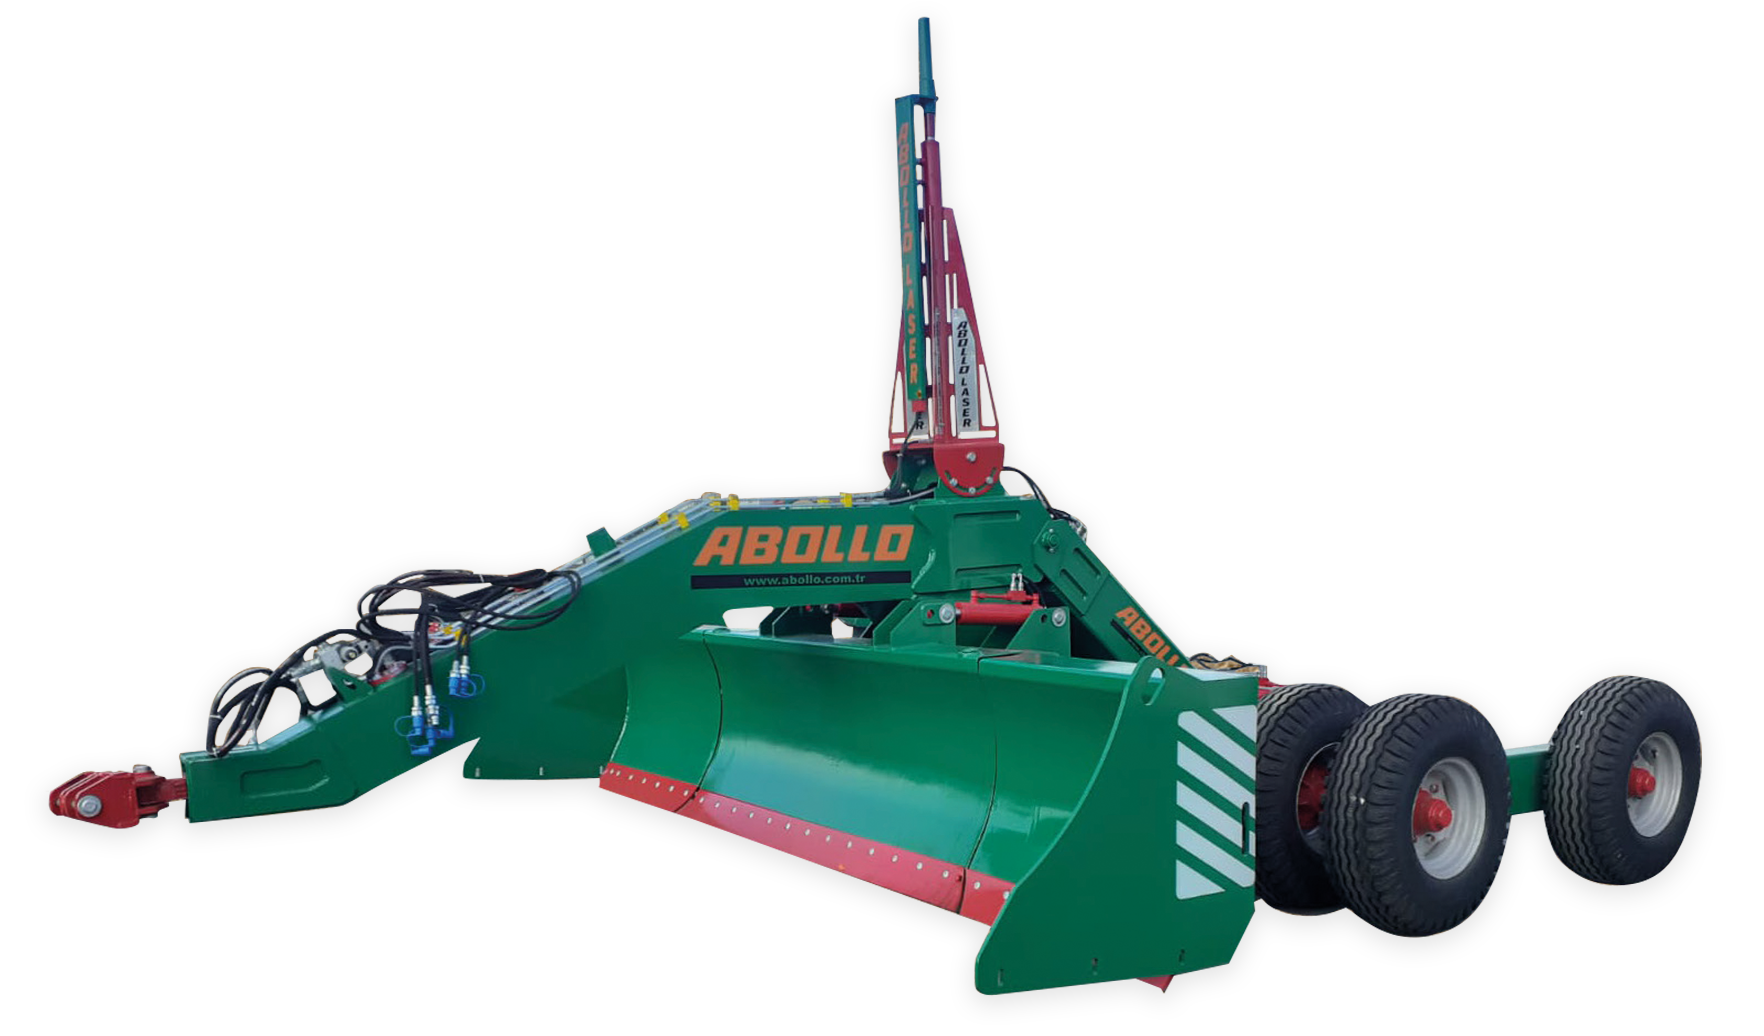 NIVEAU LASER | Abollo Agricultural Machinery